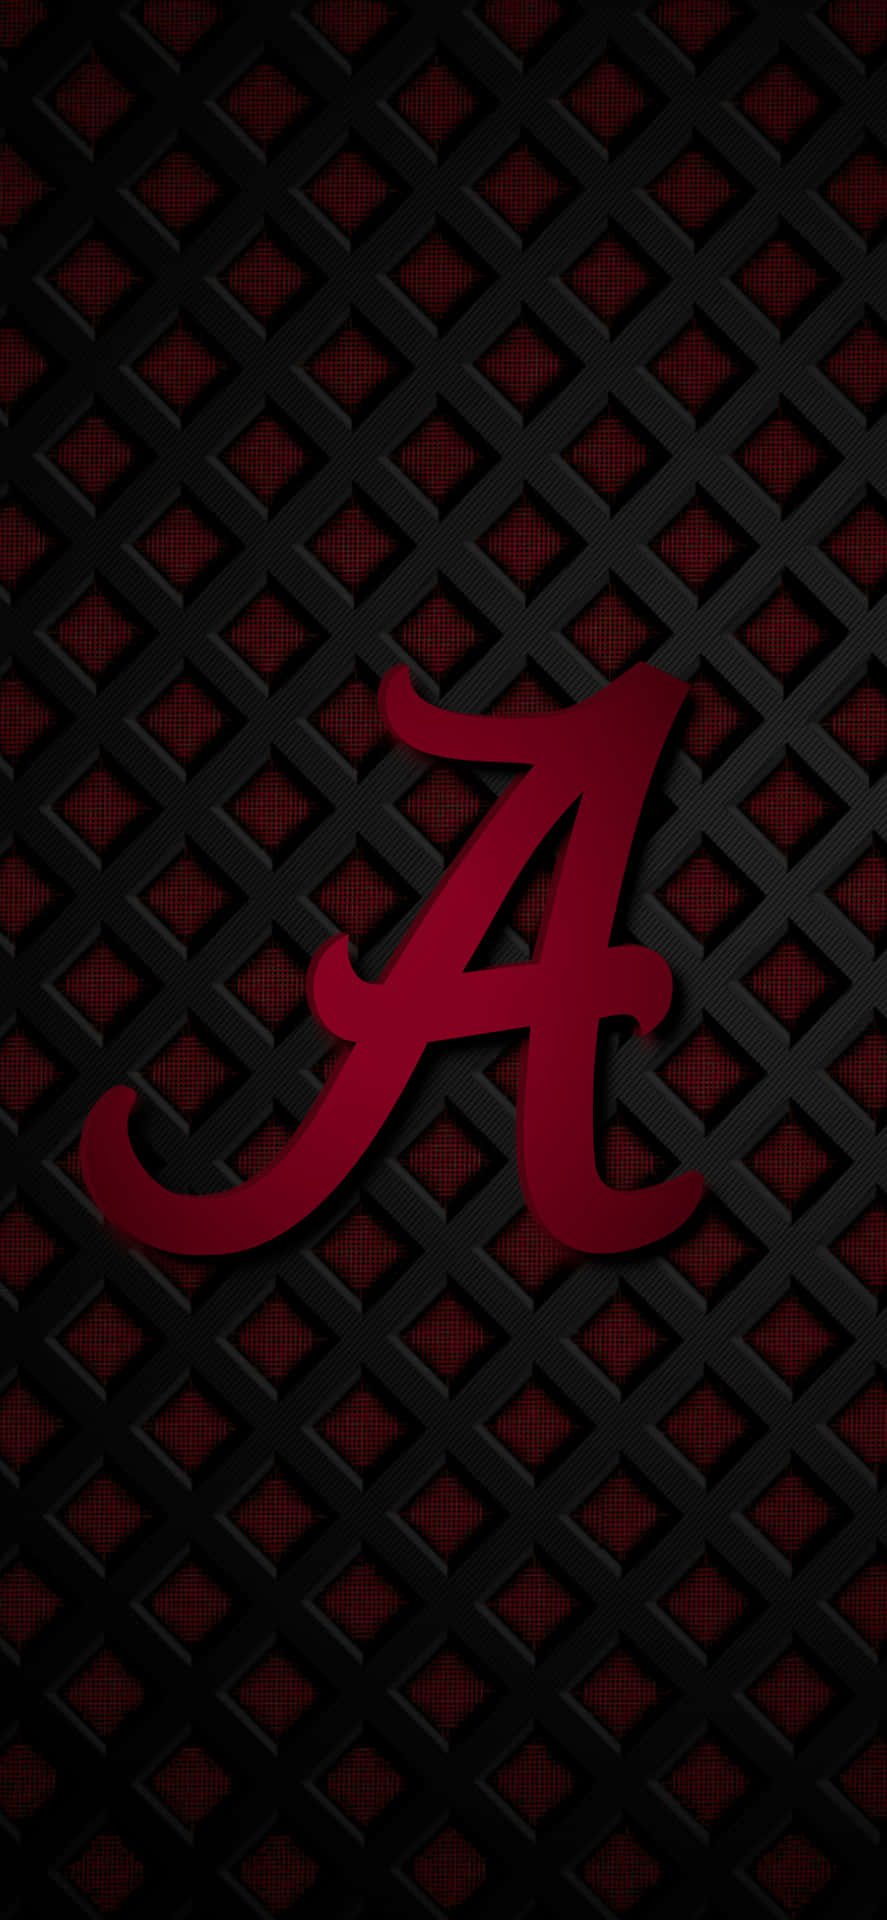 Show Your Pride With this Exclusive Alabama Football iPhone! Wallpaper